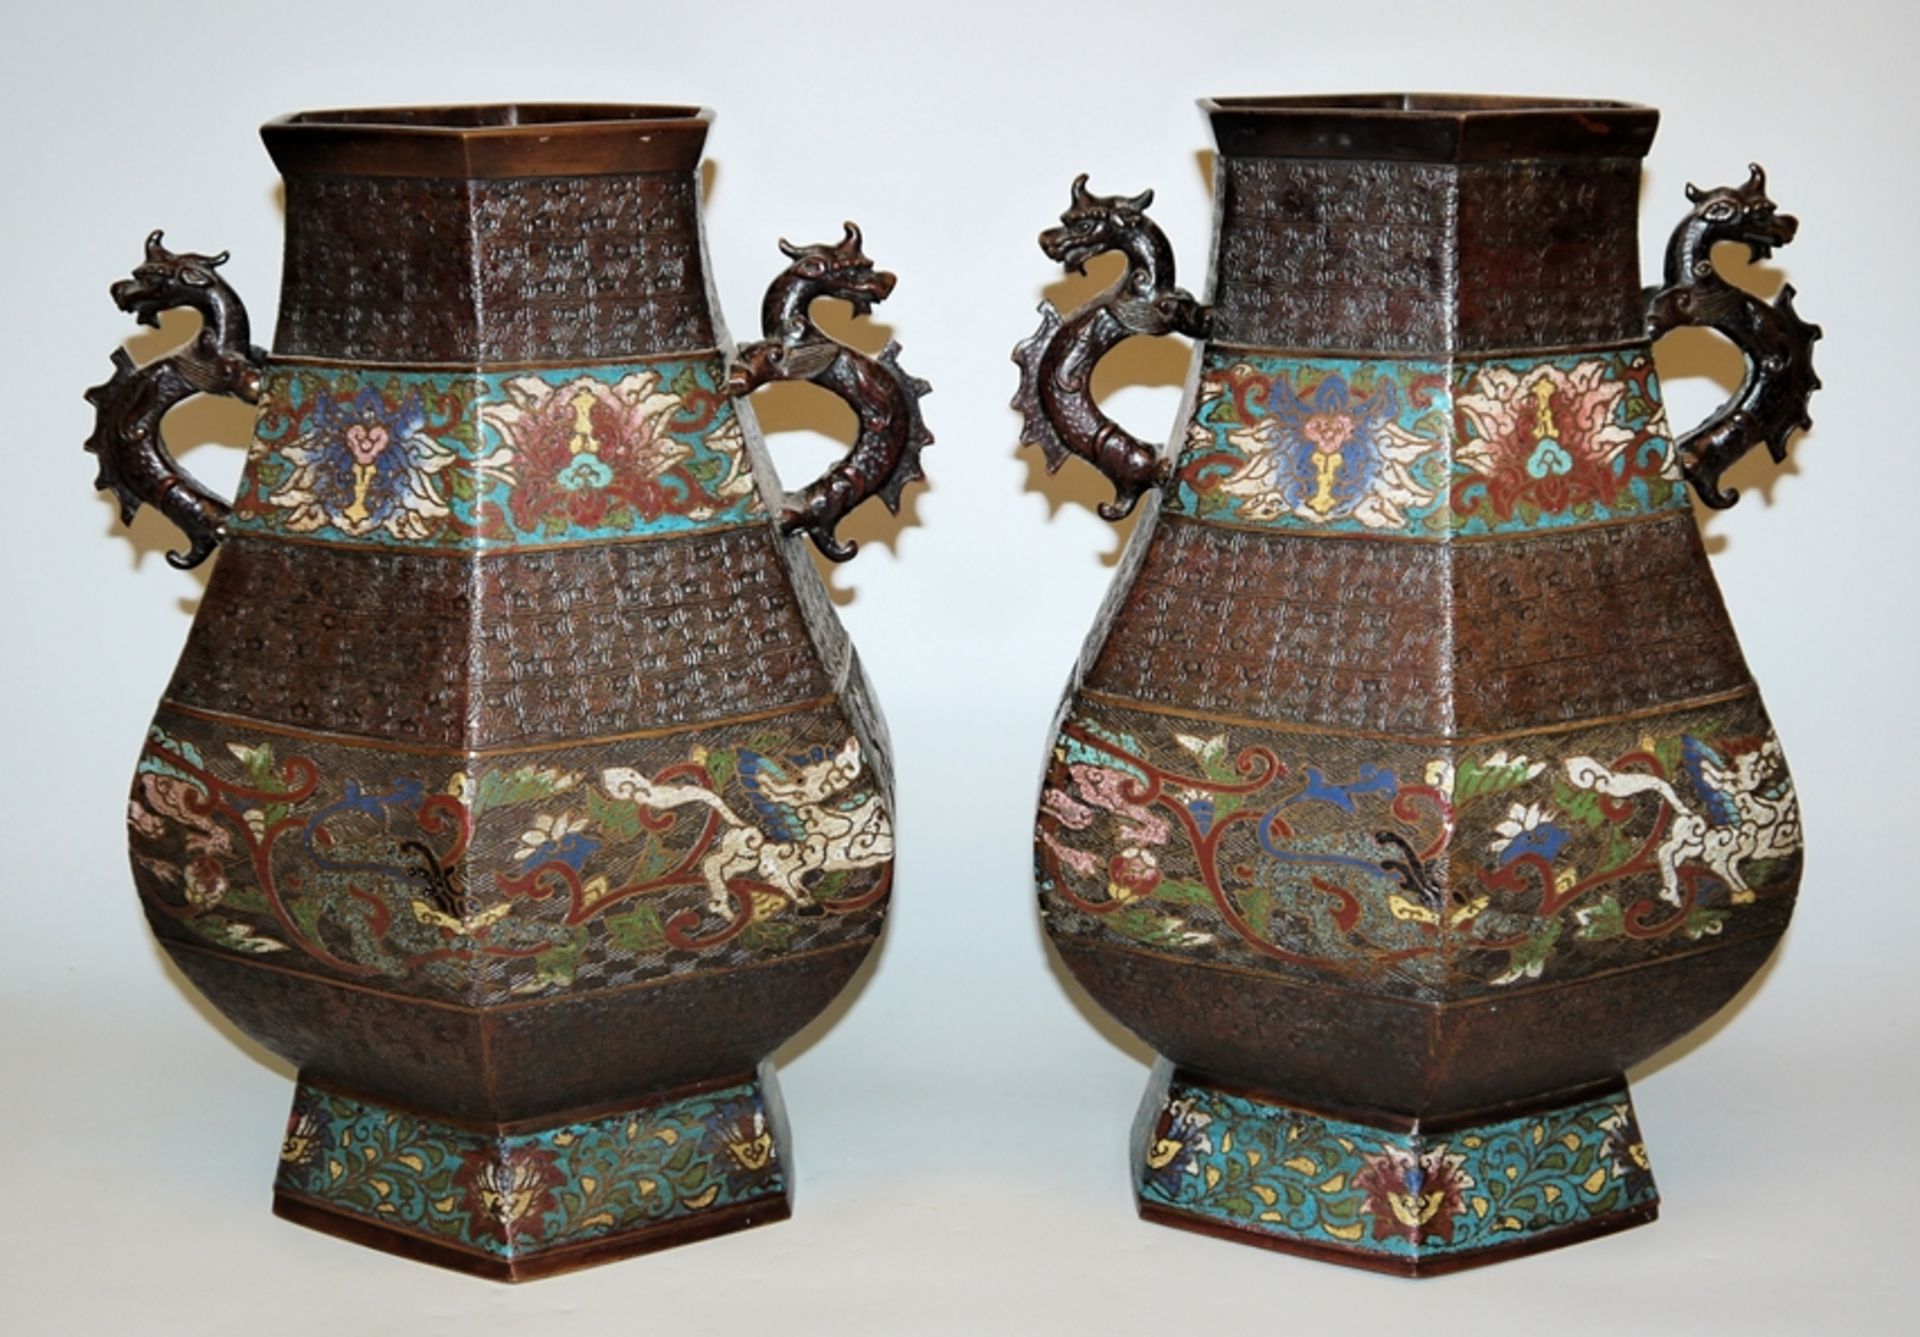 Pair of Champlevé vases in the Chinese style of the Meiji period, Japan, c. 1900